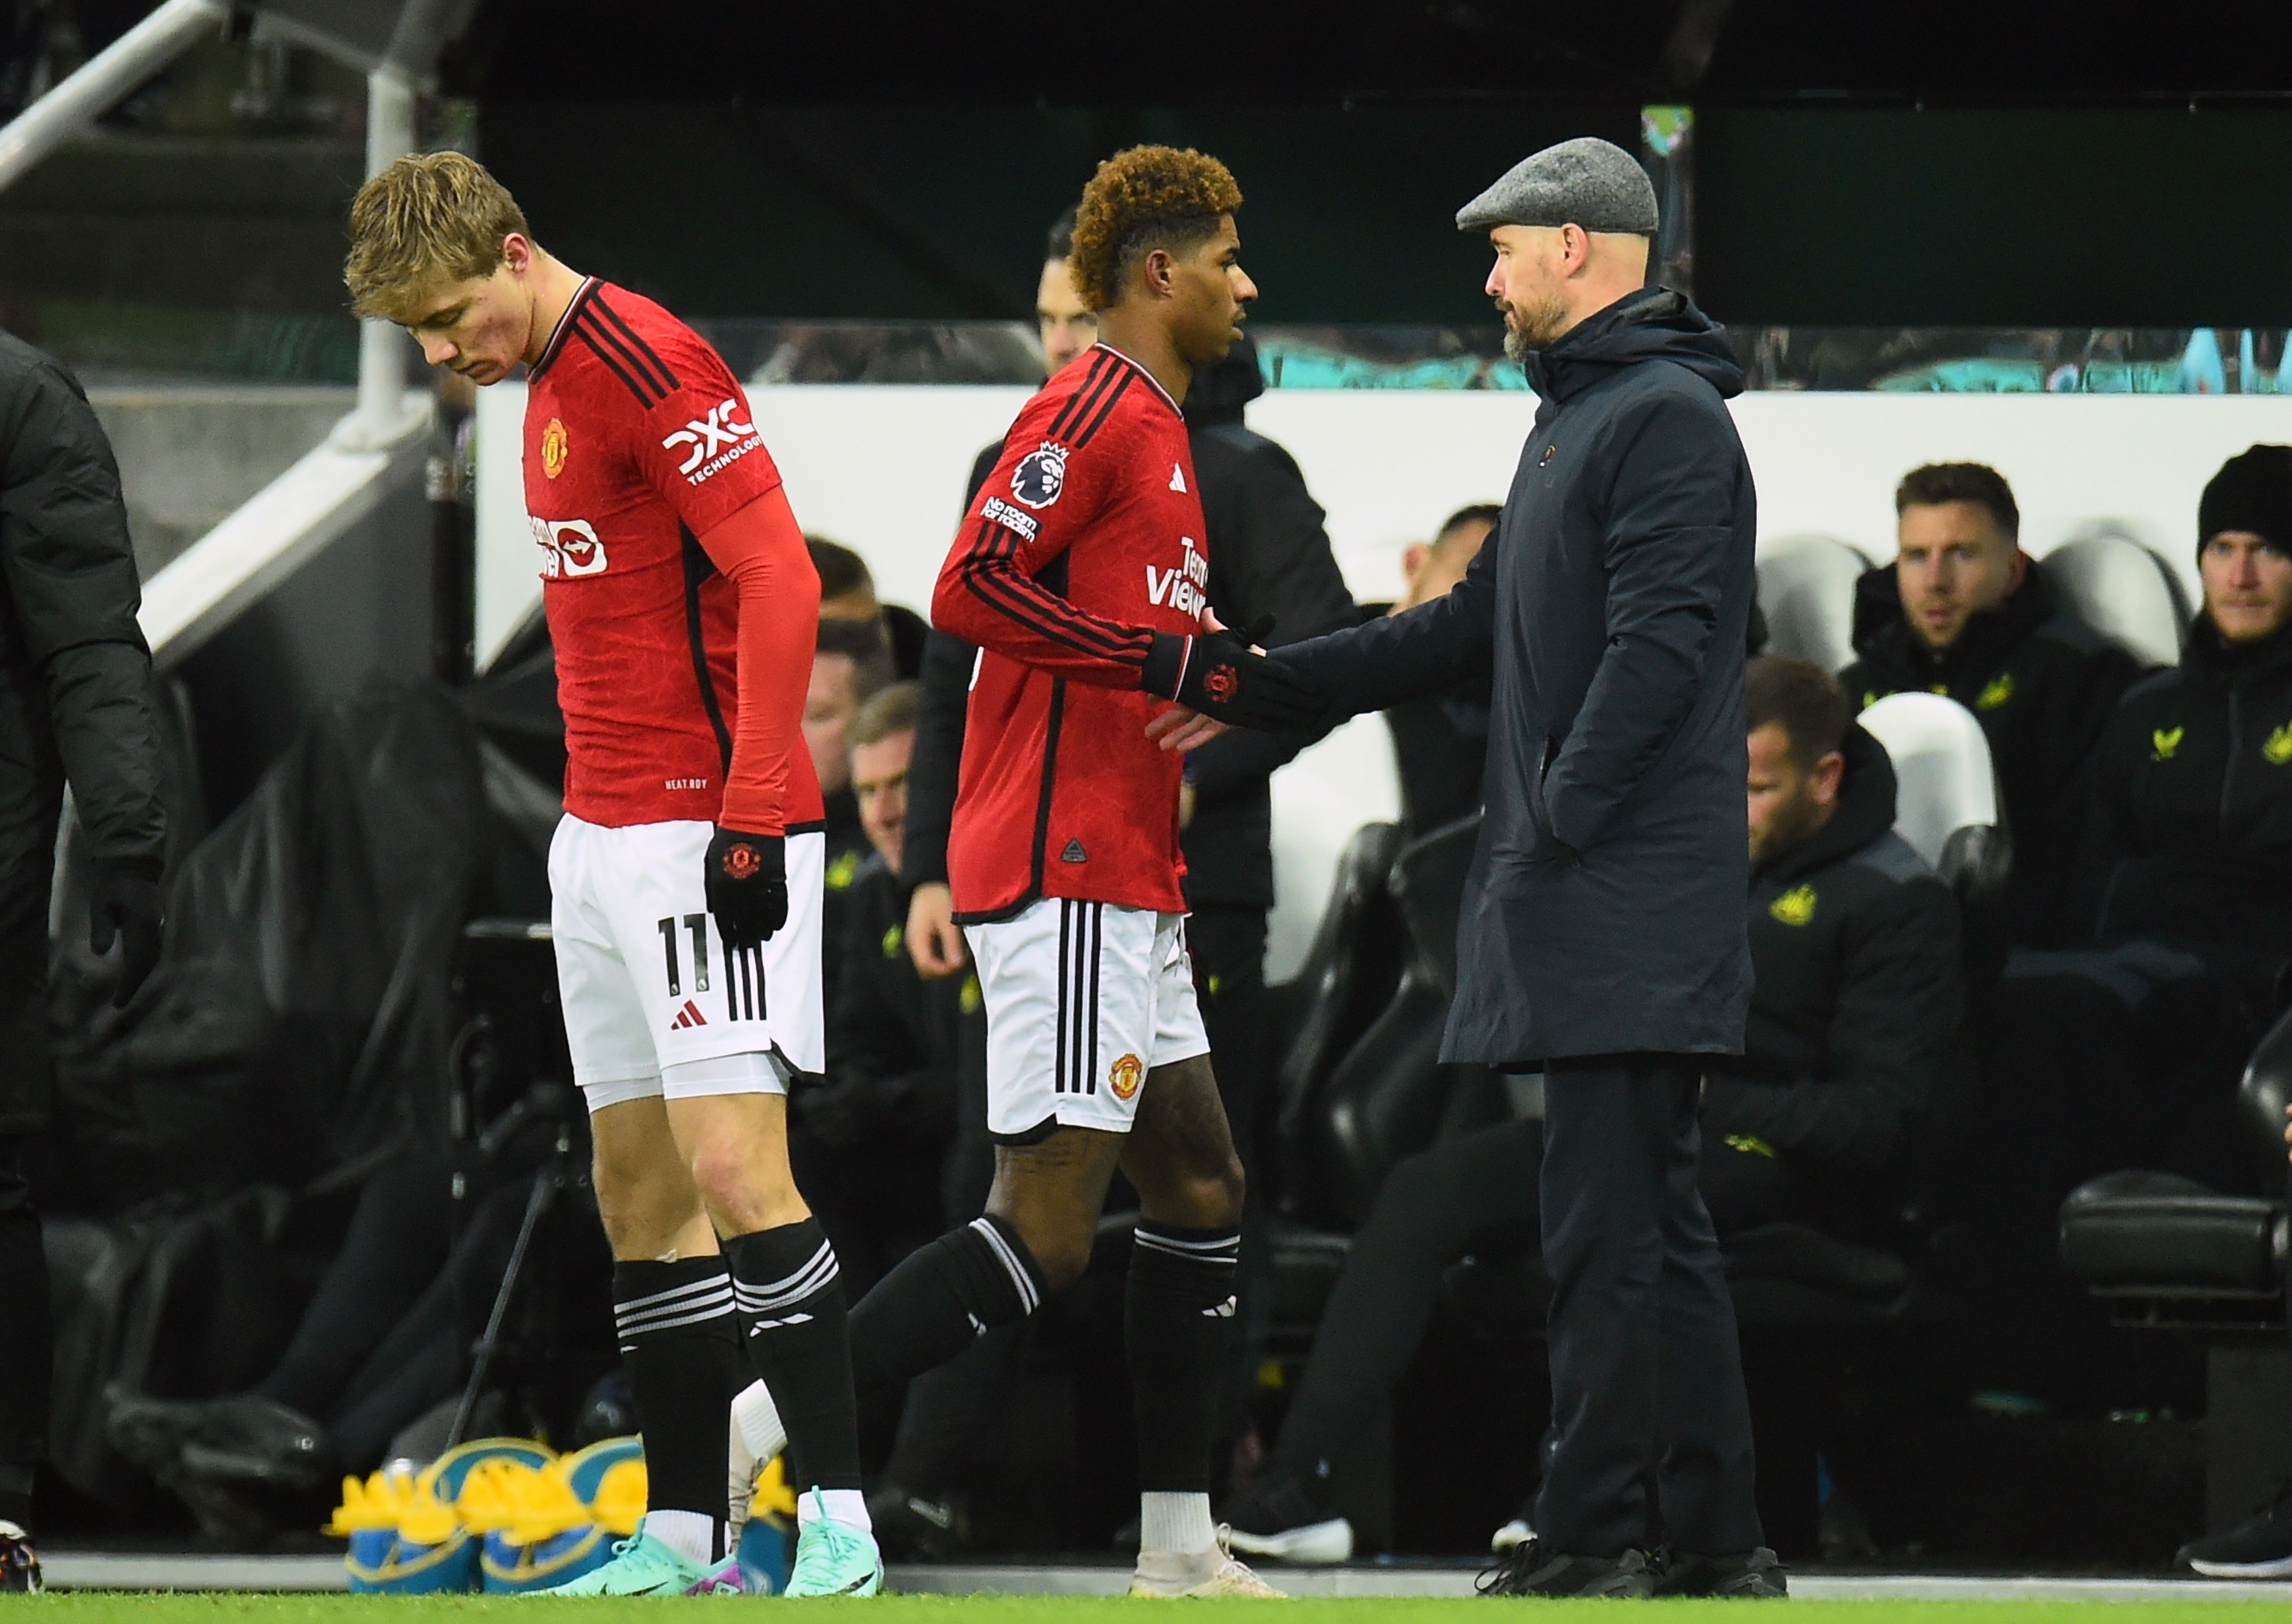 Marcus Rashford was slammed for his body language after being subbed off